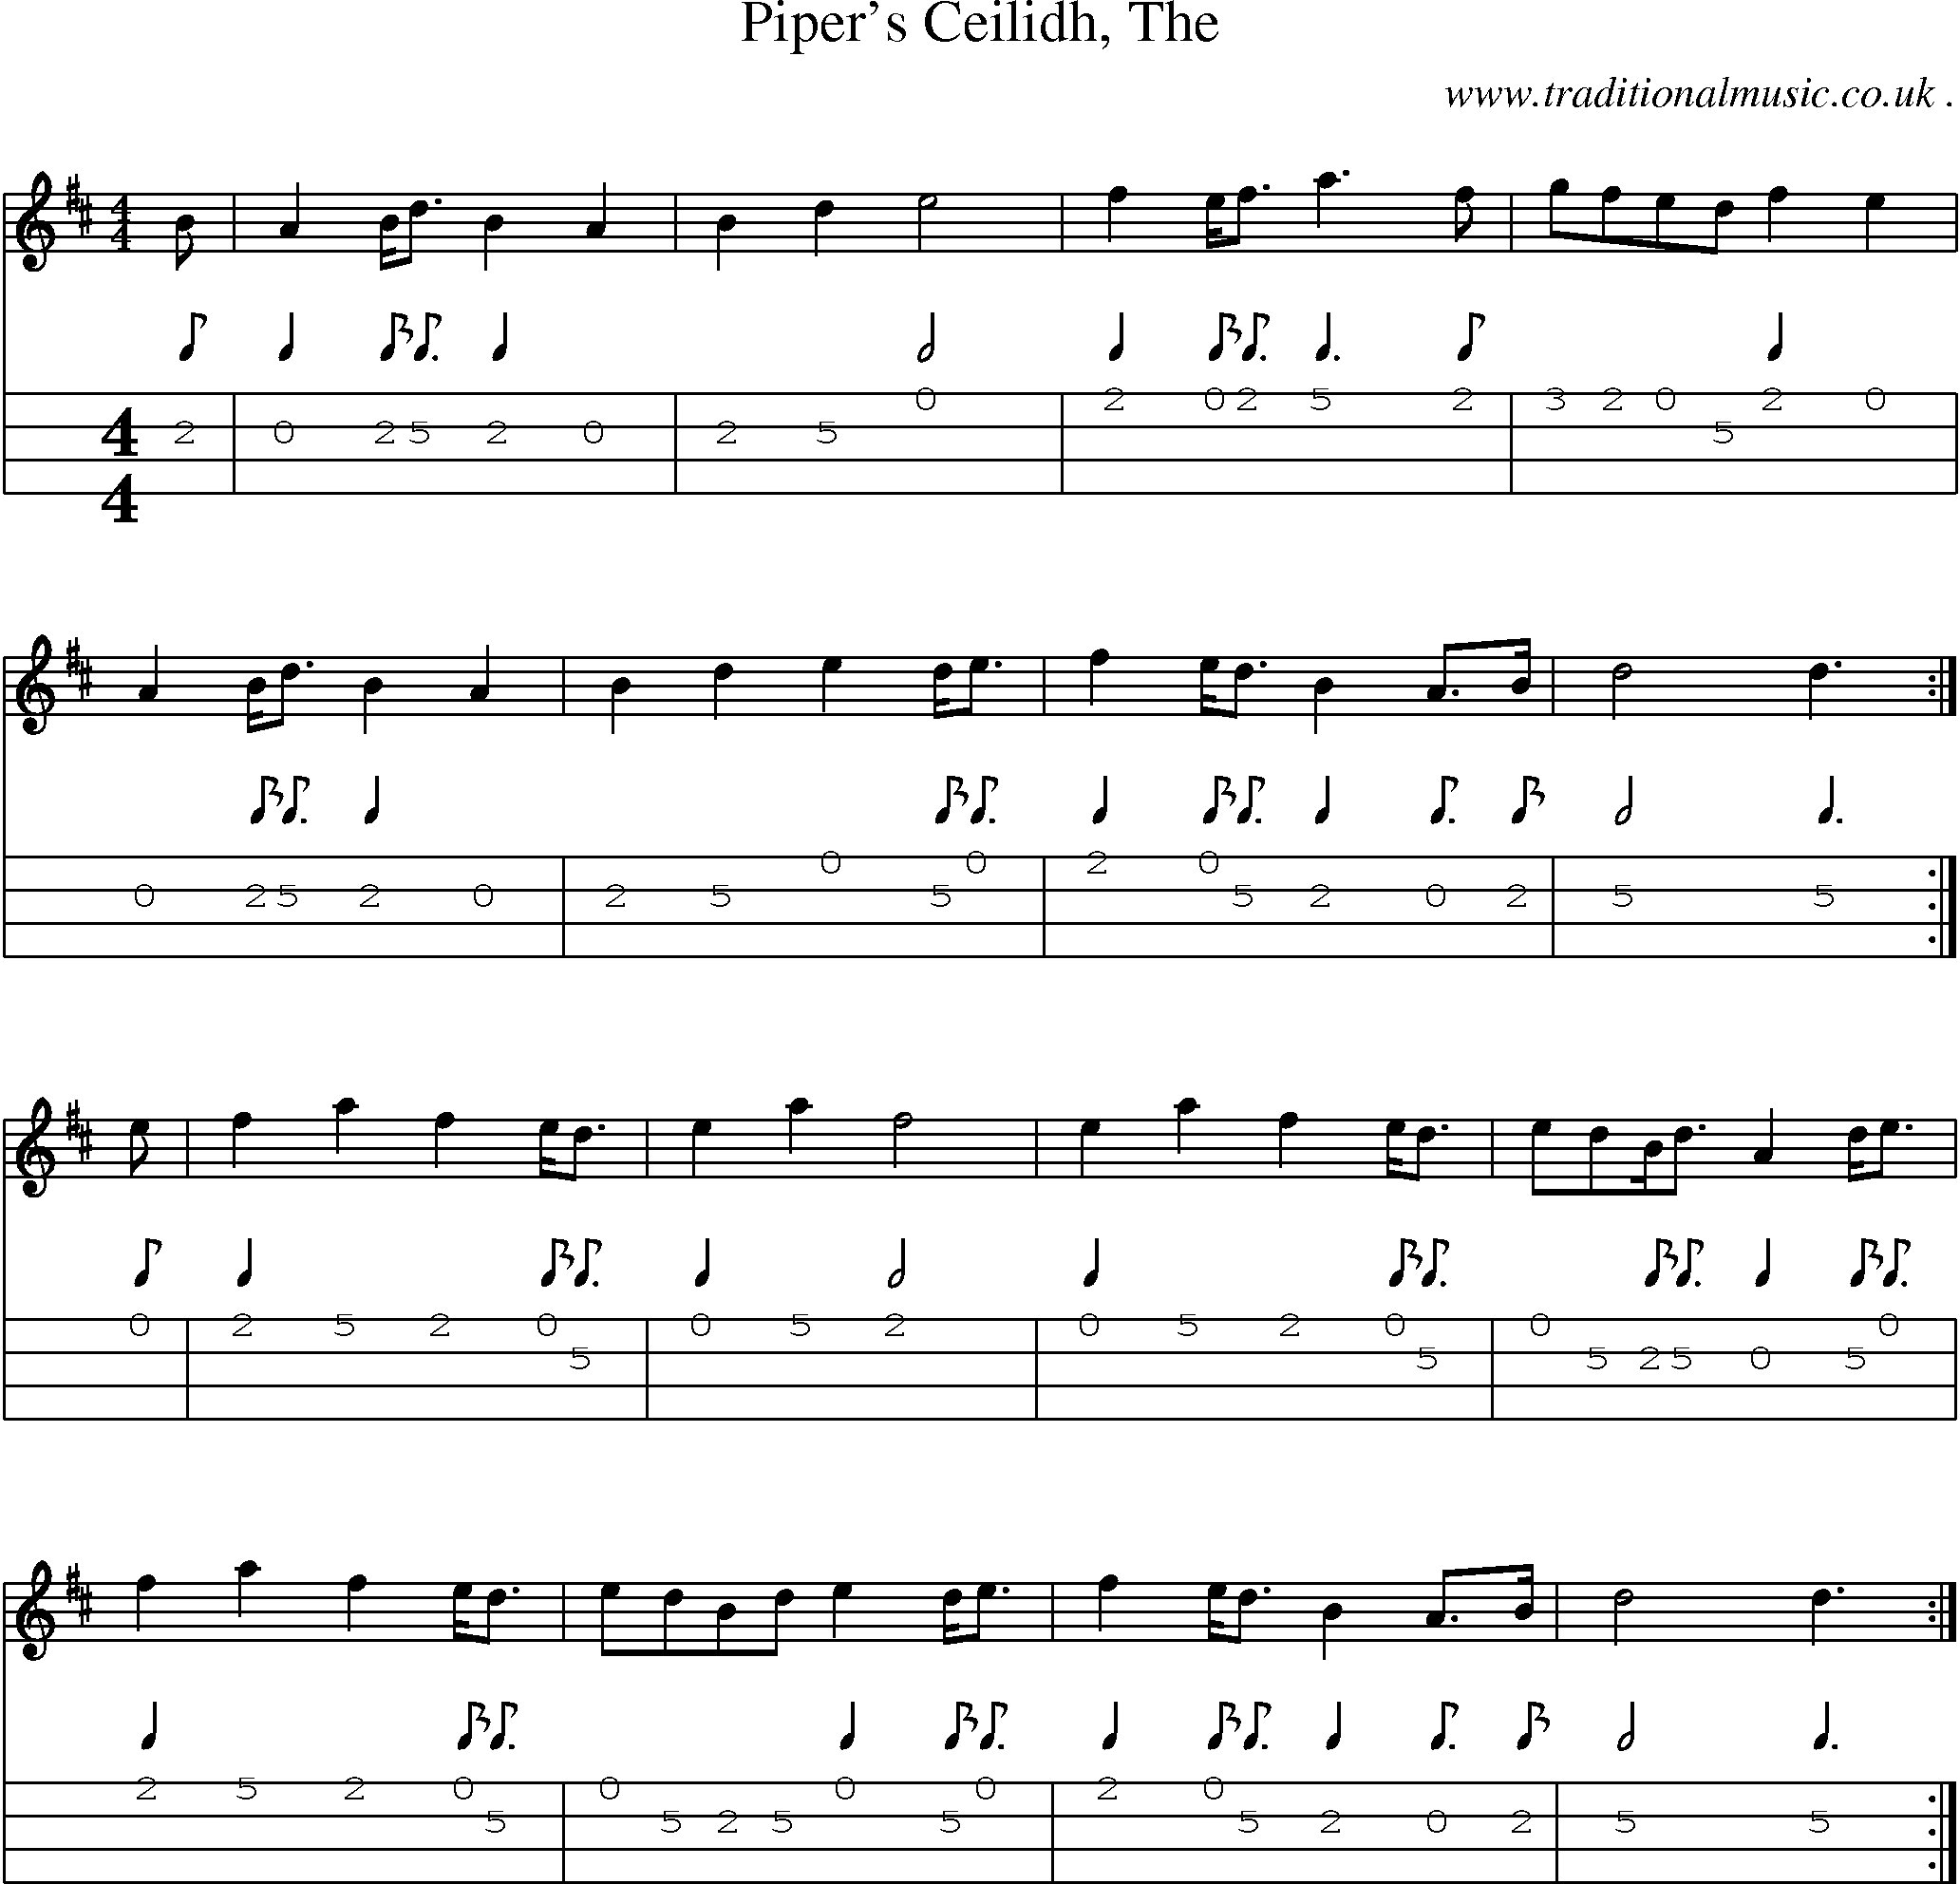 Sheet-music  score, Chords and Mandolin Tabs for Pipers Ceilidh The